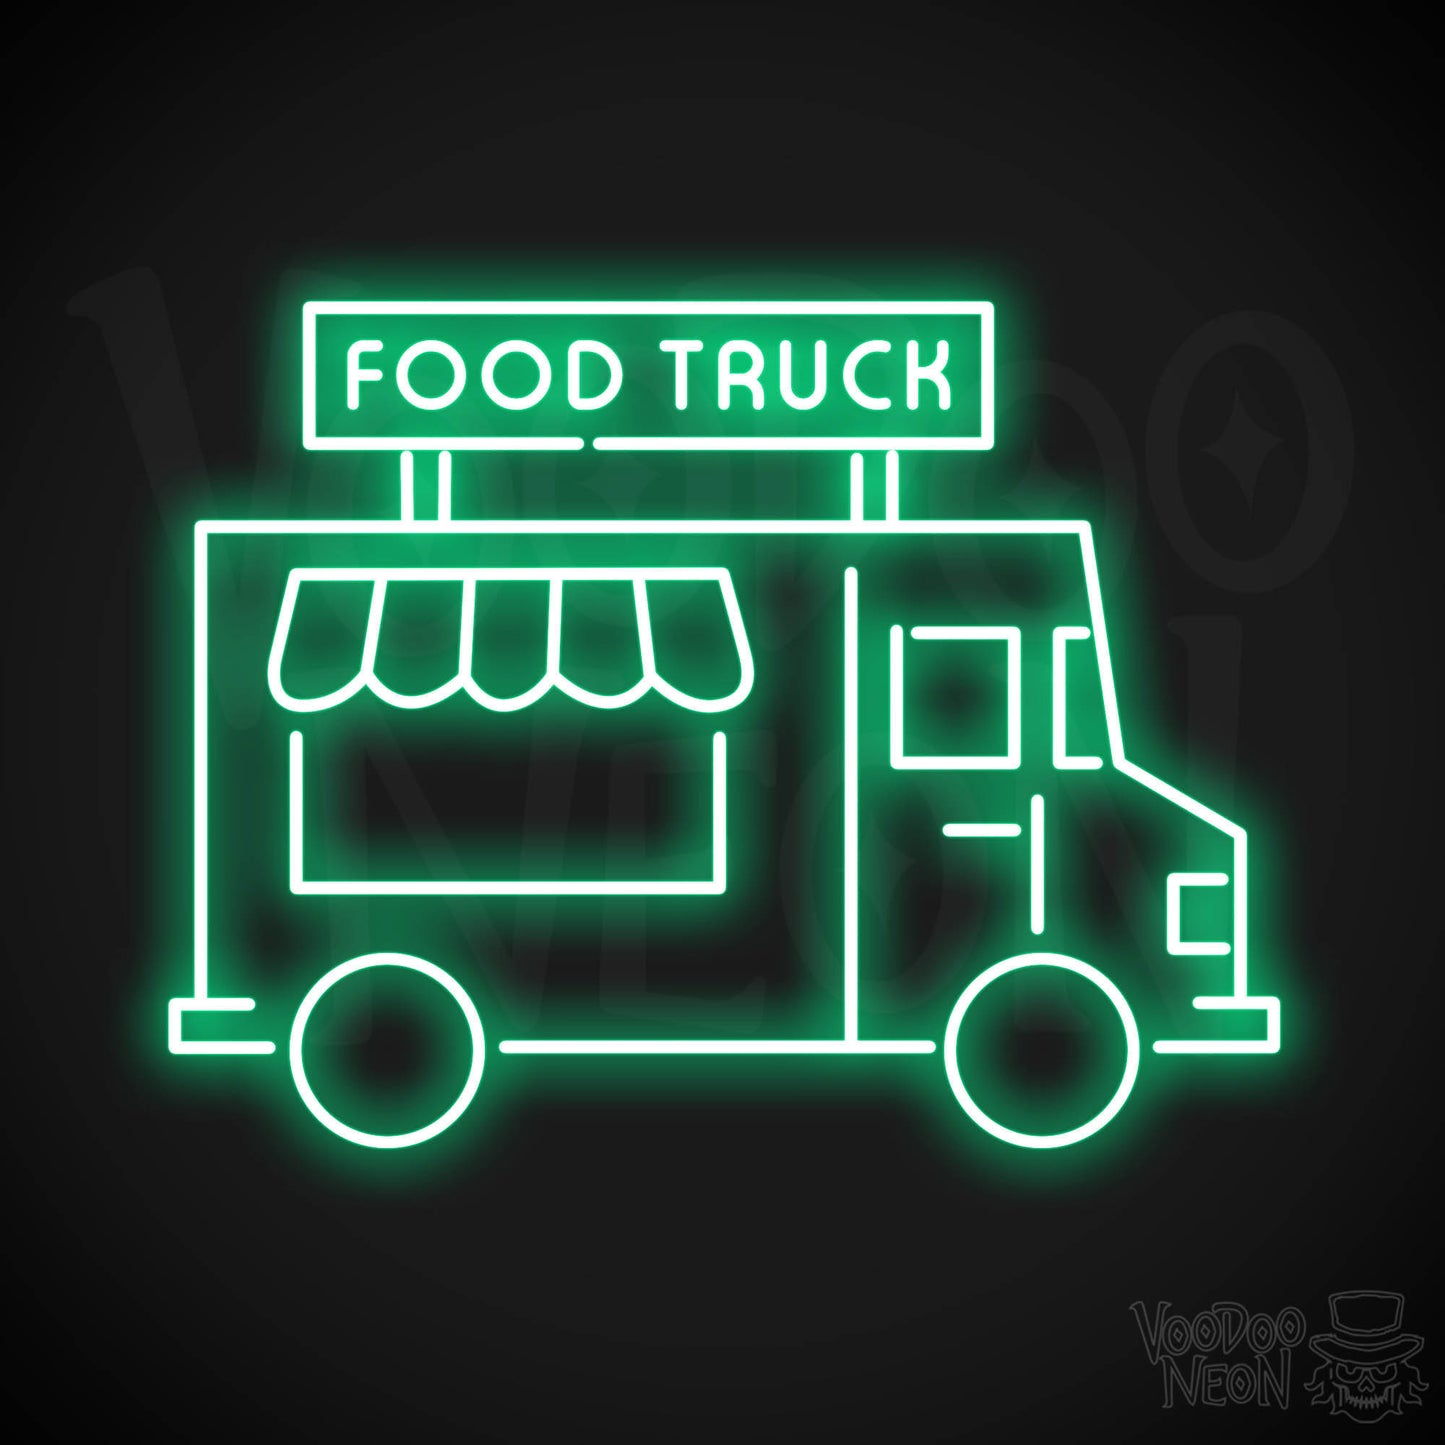 Food Truck LED Neon - Green